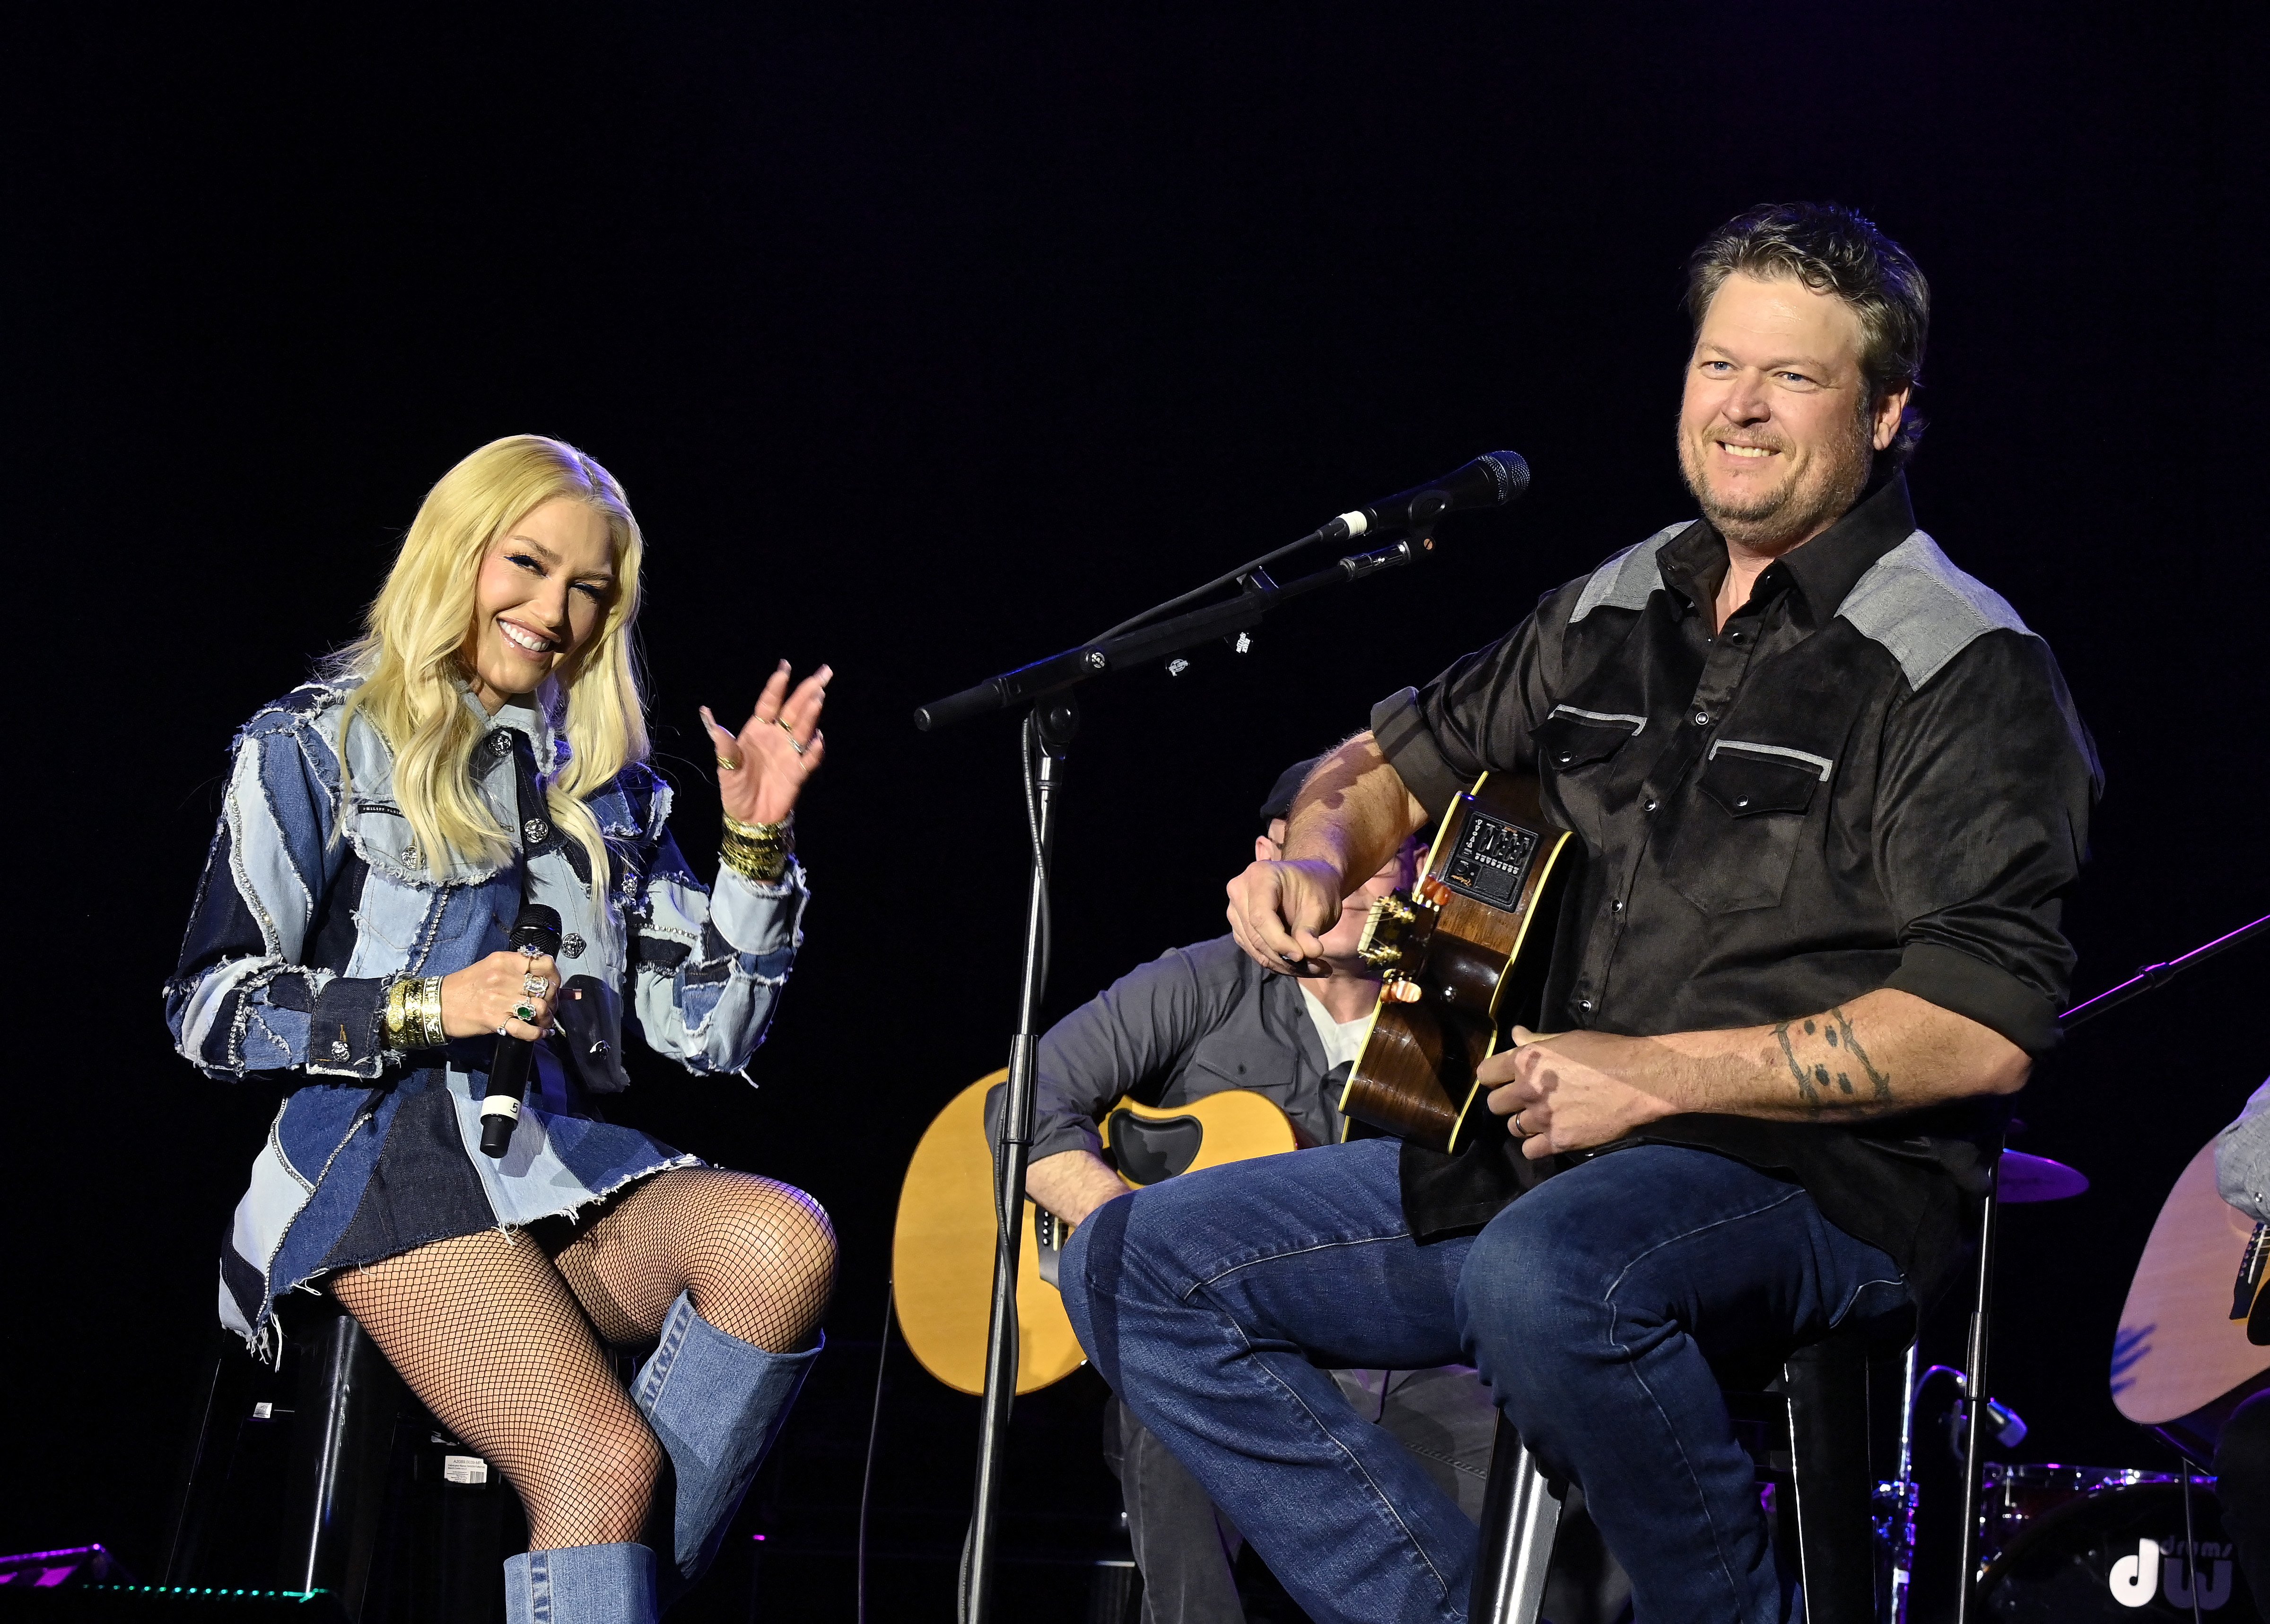 She recently joined Blake onstage at one of his concerts